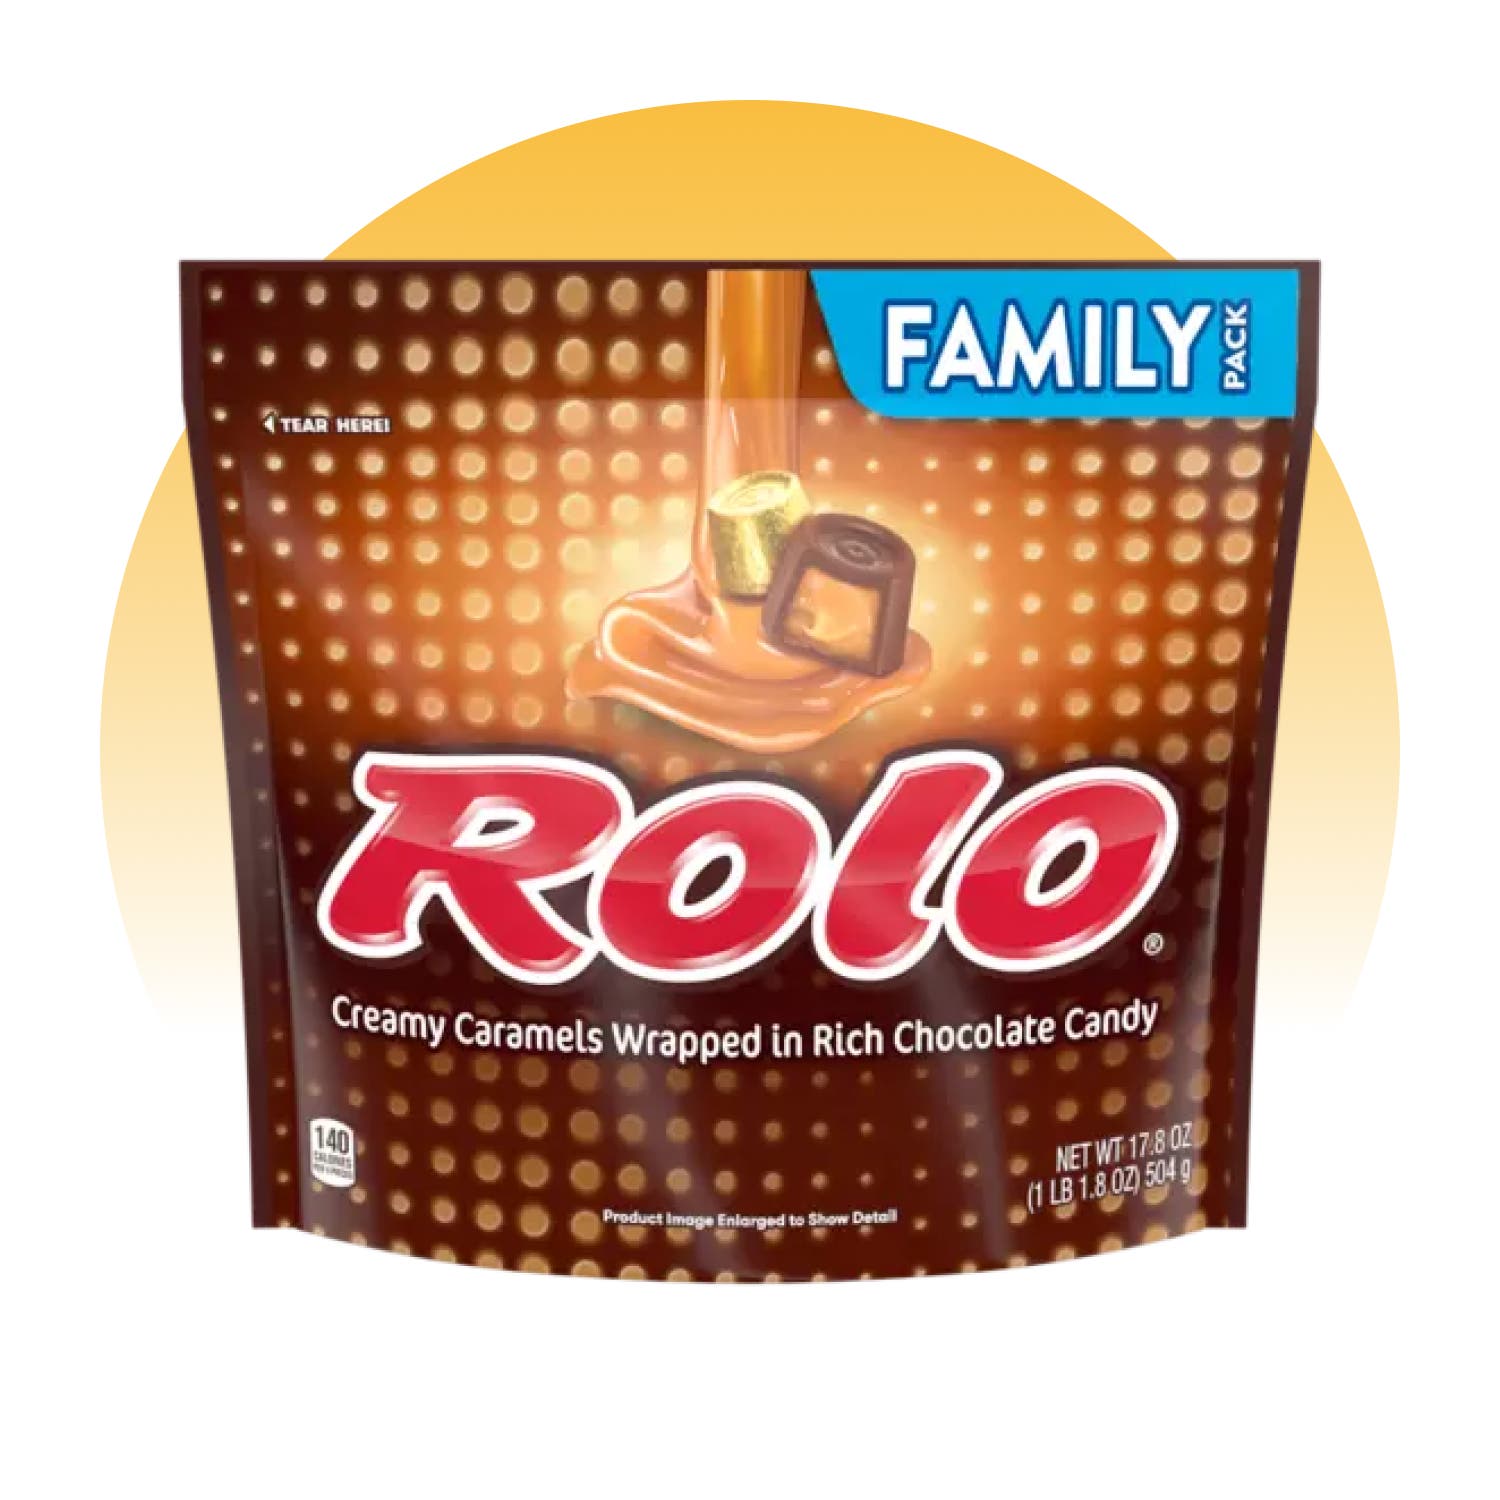 bag of rolo creamy caramels in rich chocolate candy